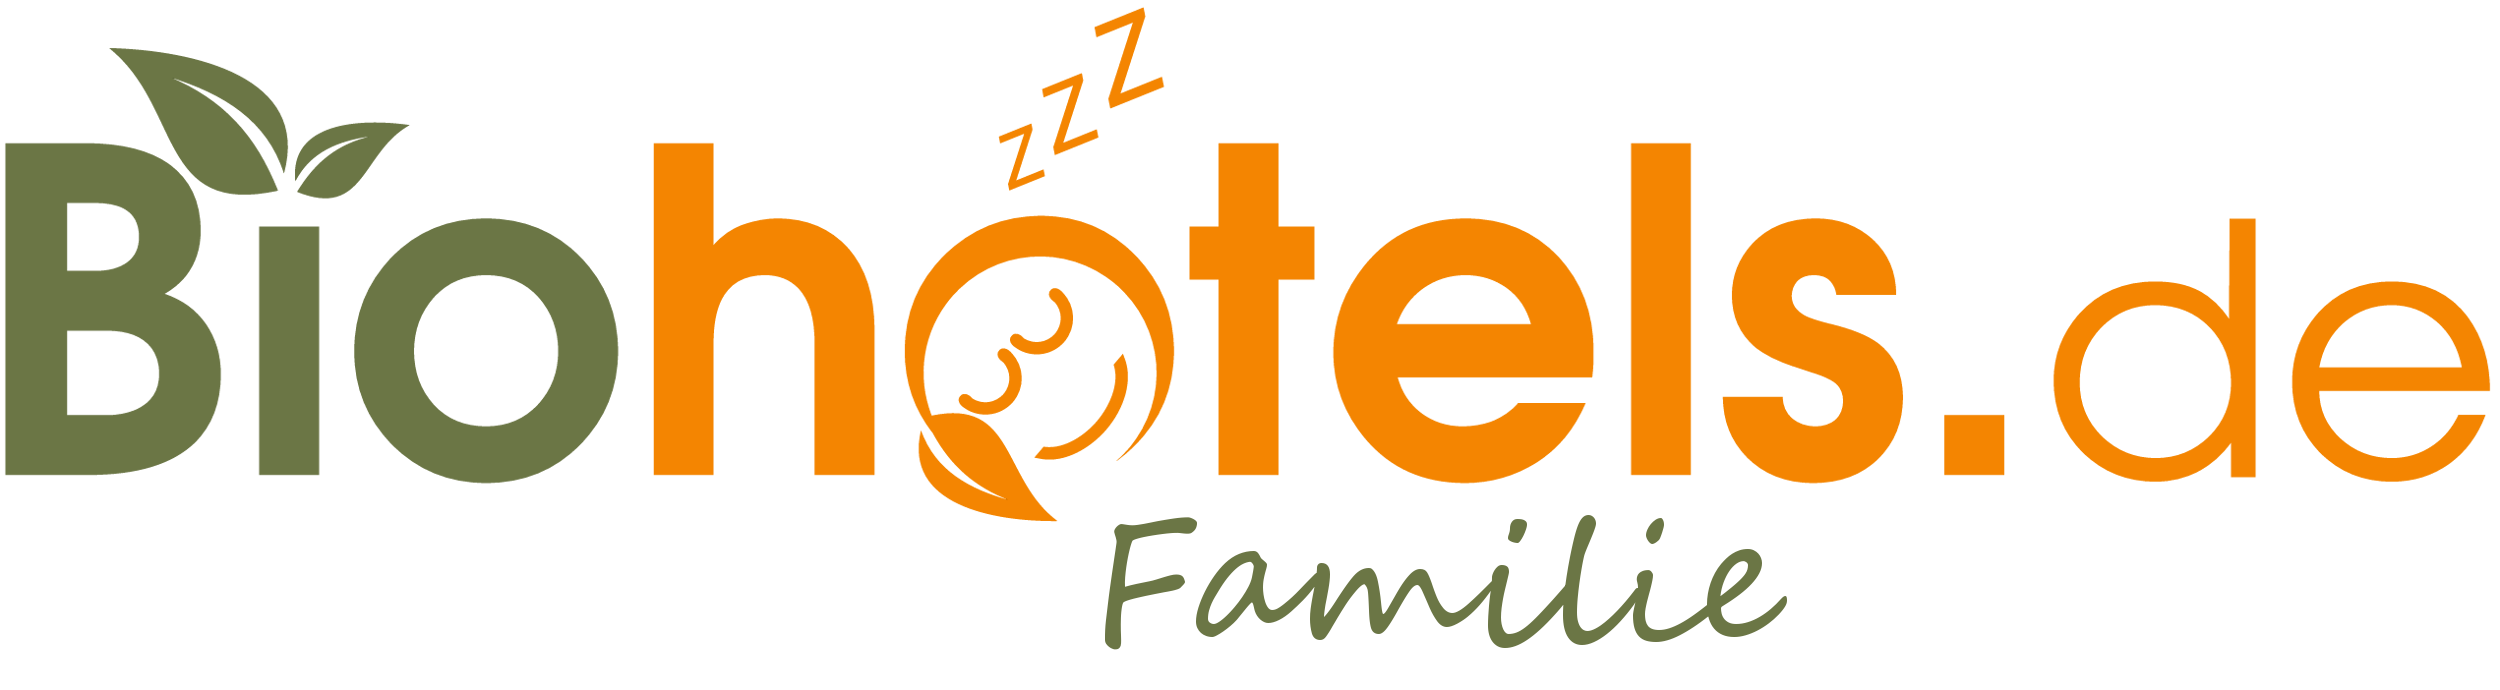 Organic hotels for families